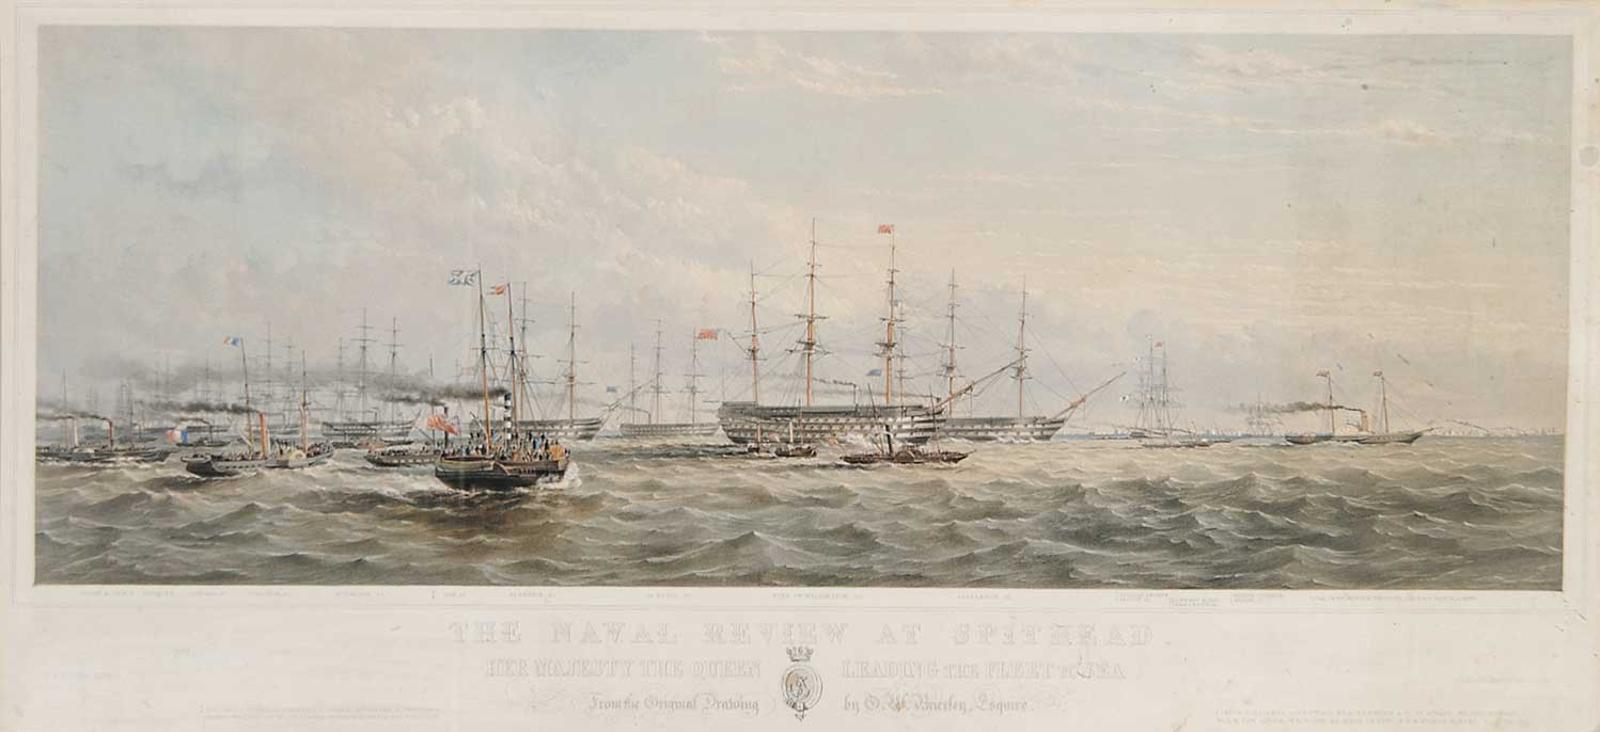 Oswald Walters Brierly - The Naval Review at Spithead, Her Majesty The Queen Leading the Fleet to Sea